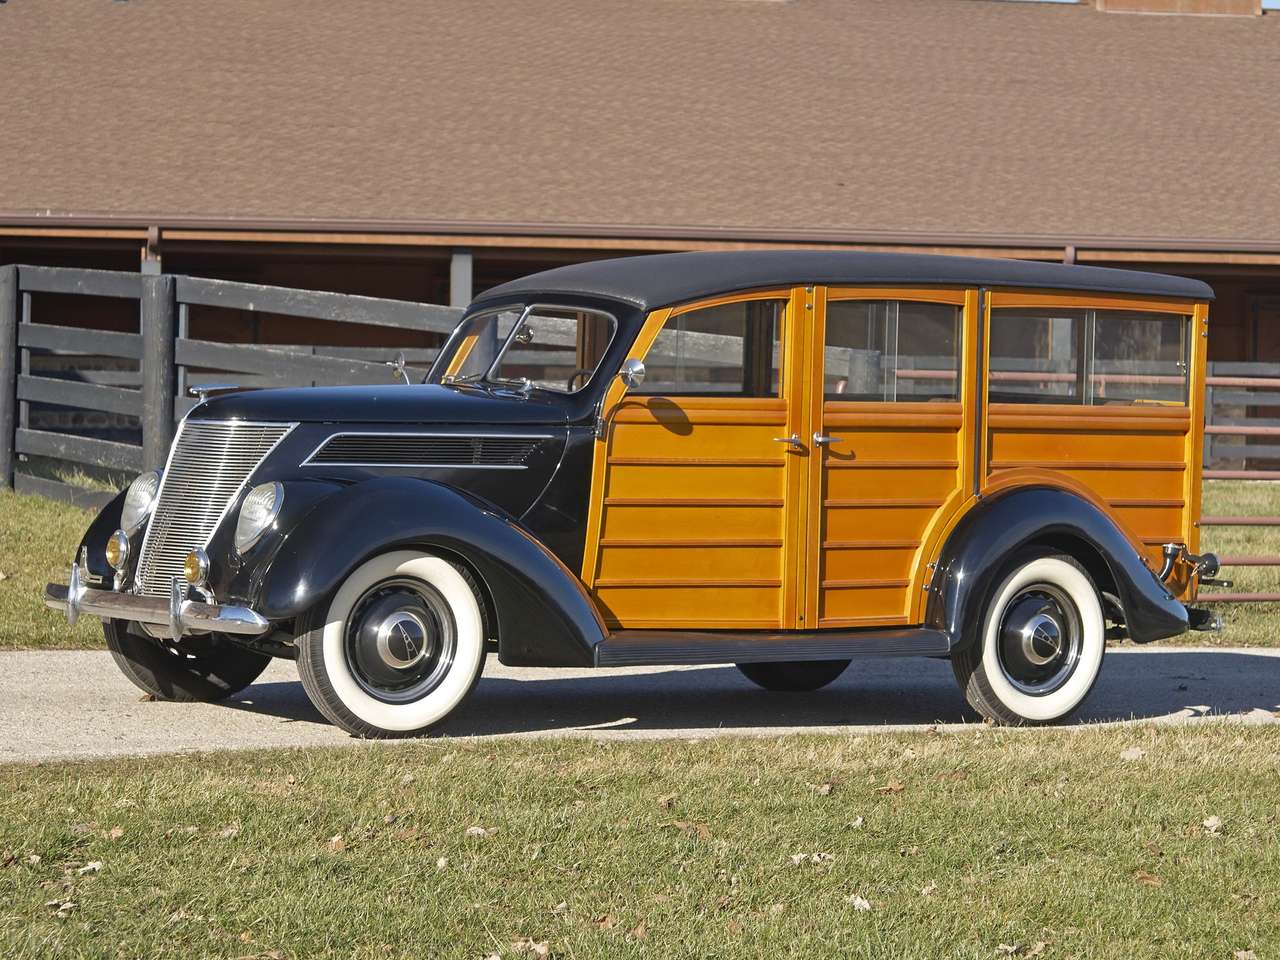 1937 Ford V-8 Deluxe Station Wagon puzzle online